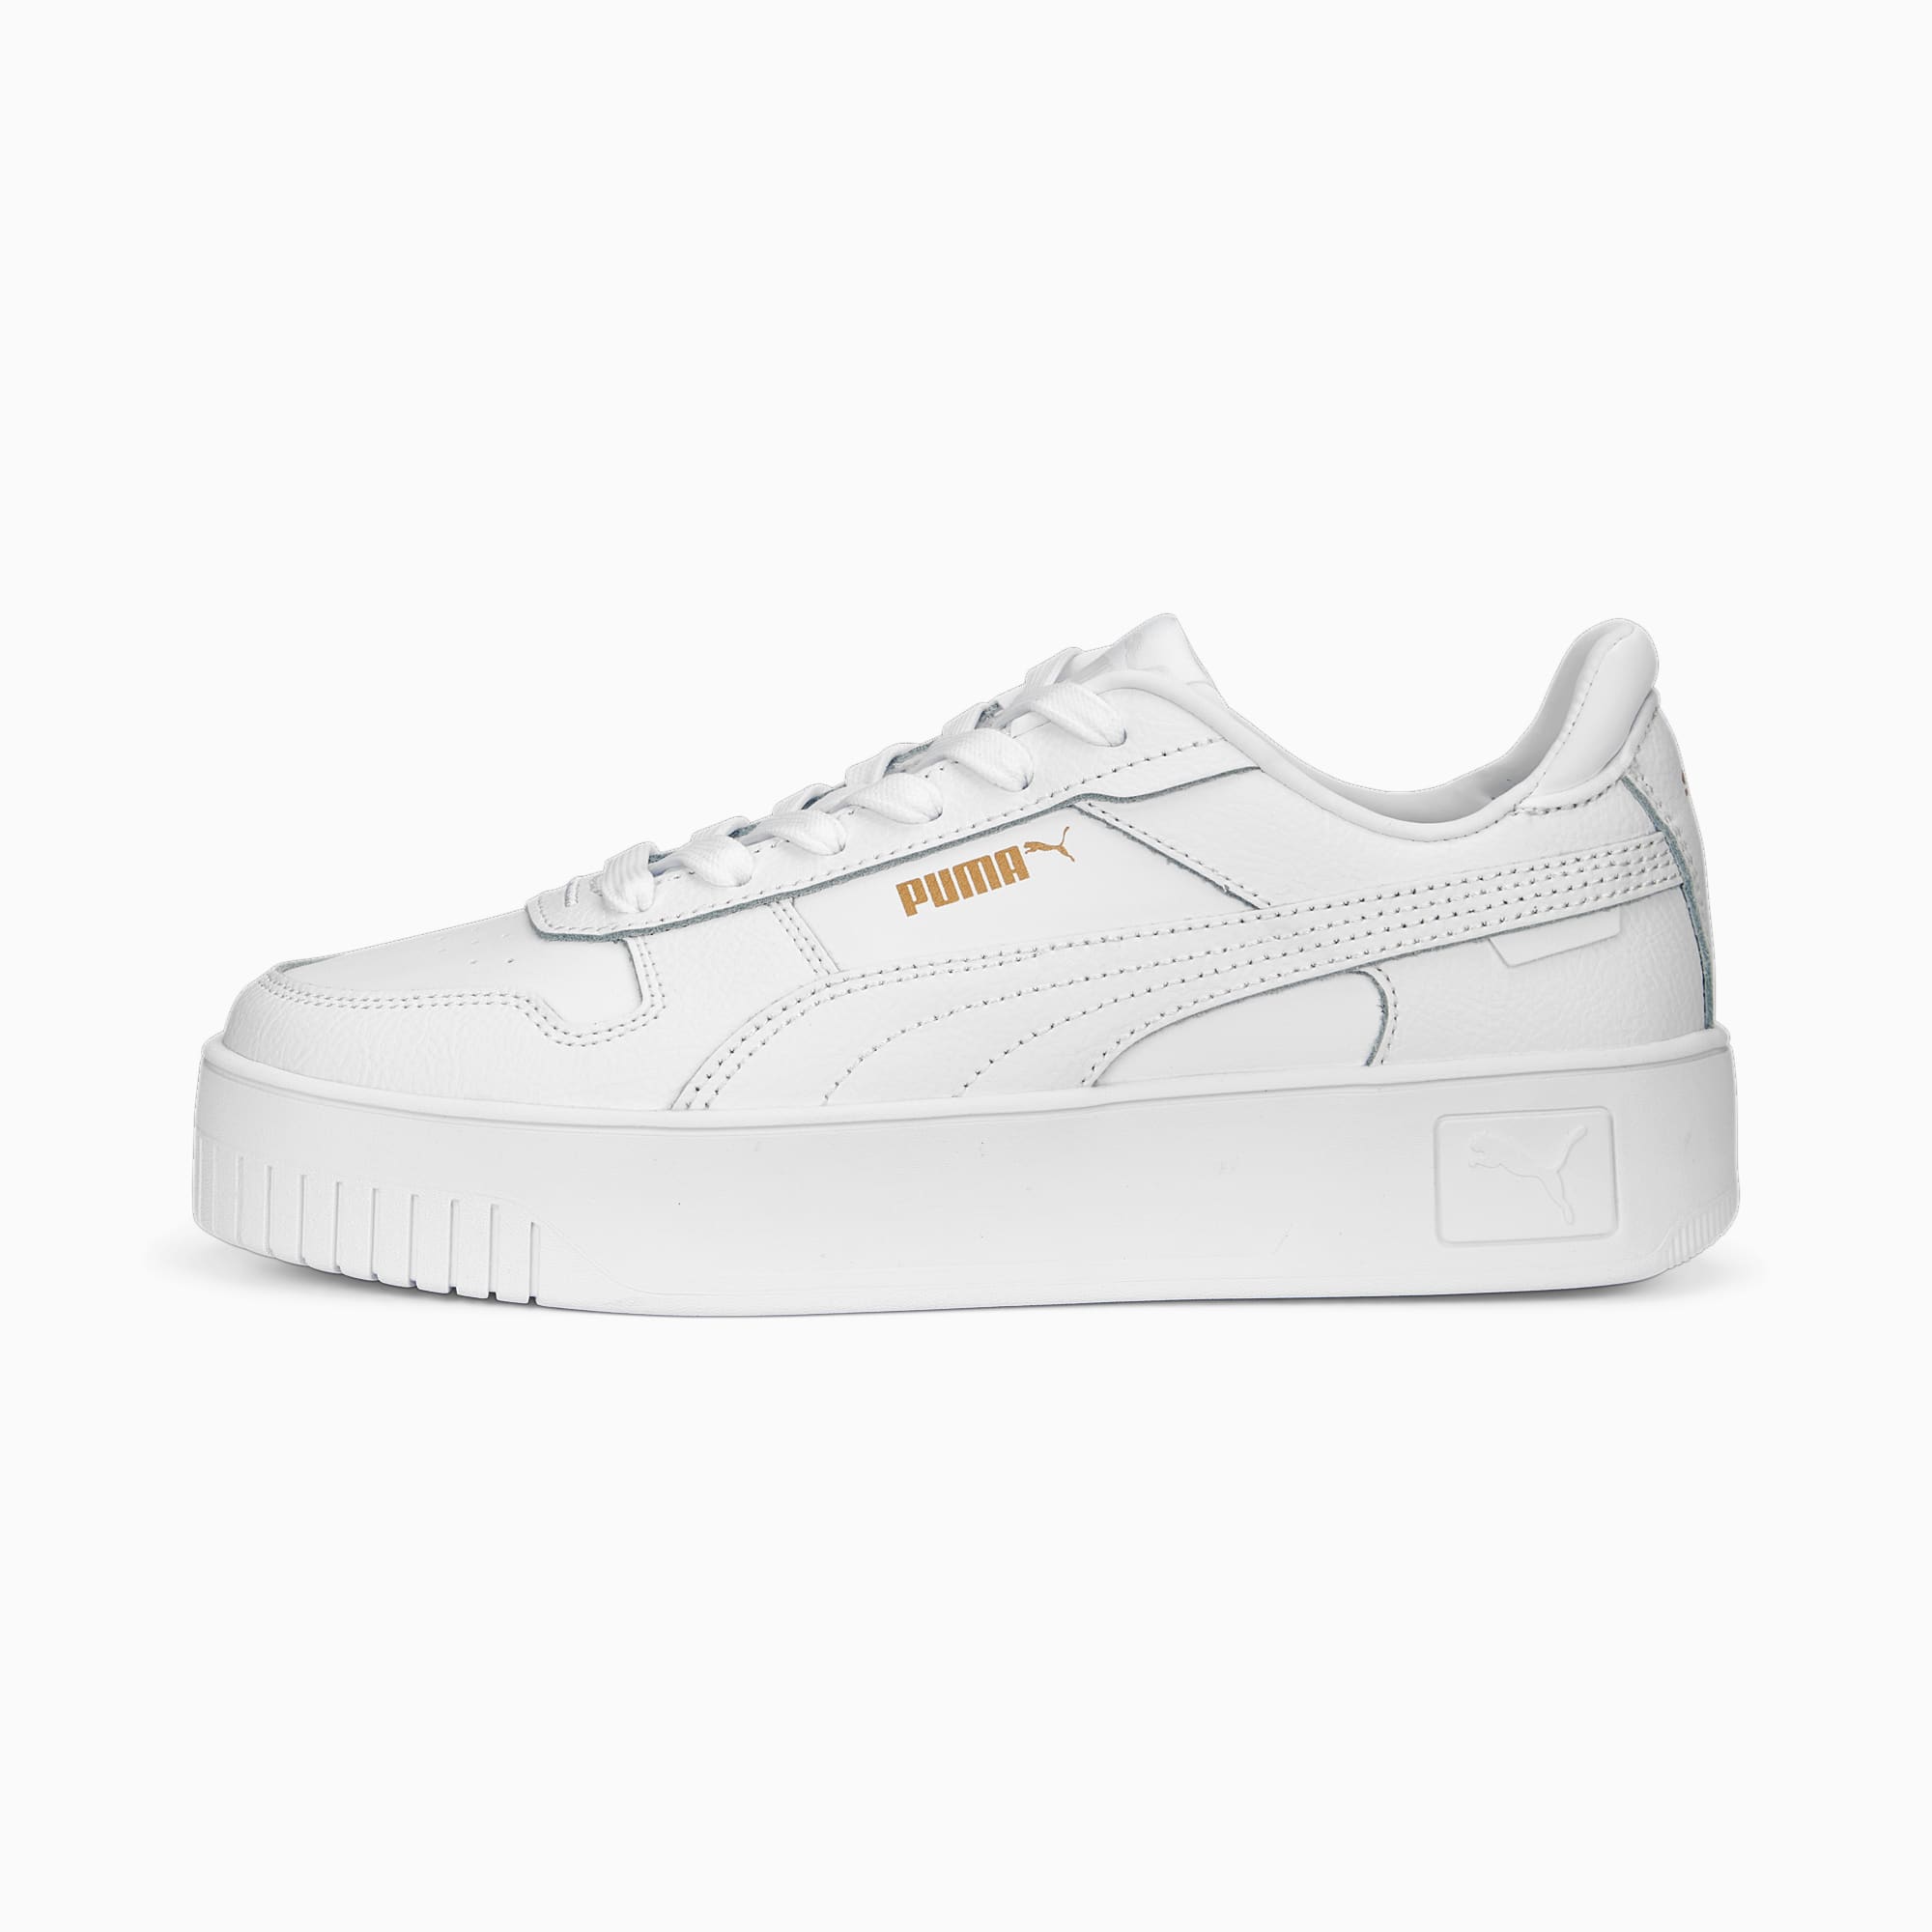 PUMA Carina Street Sneakers Women, White/Gold, Size 35,5, Shoes